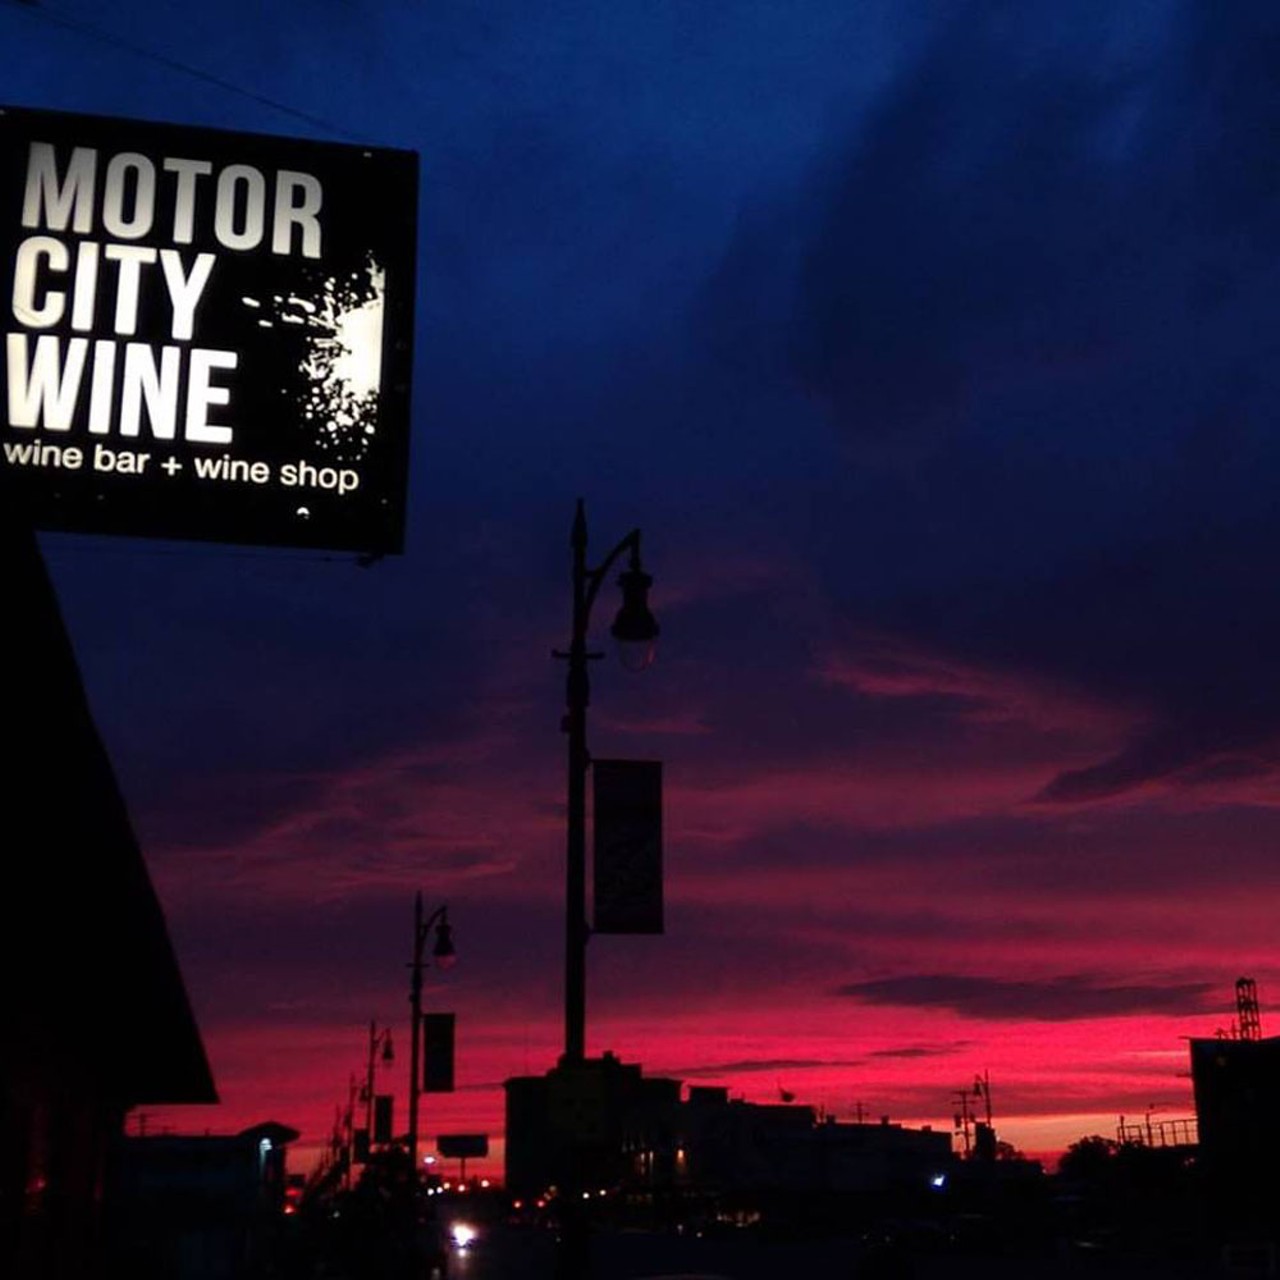 Motor City Wine
1949 Michigan Ave, Detroit
(313)-483-7283
Are you a classy introvert? Look no further, my dear friend. Sip on some delicious wine that is made right here in the the Motor City.